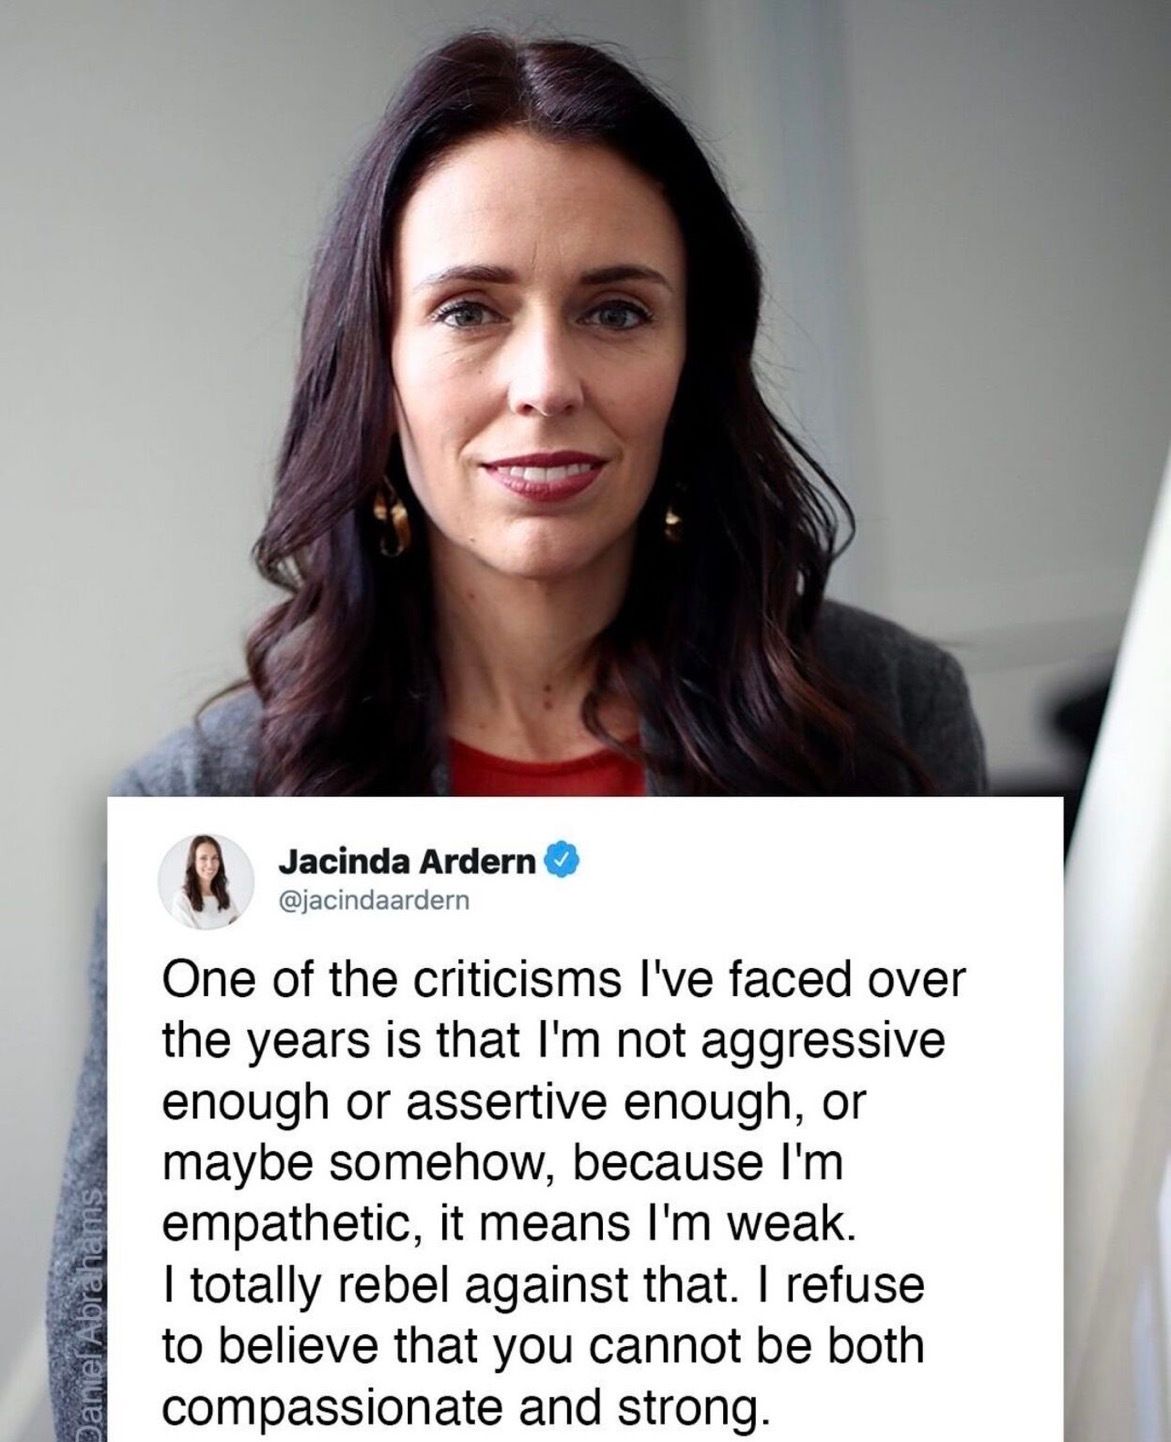 Tweet from New Zealand Prime Minister Jacinda Ardern on compassion and strength in leadership